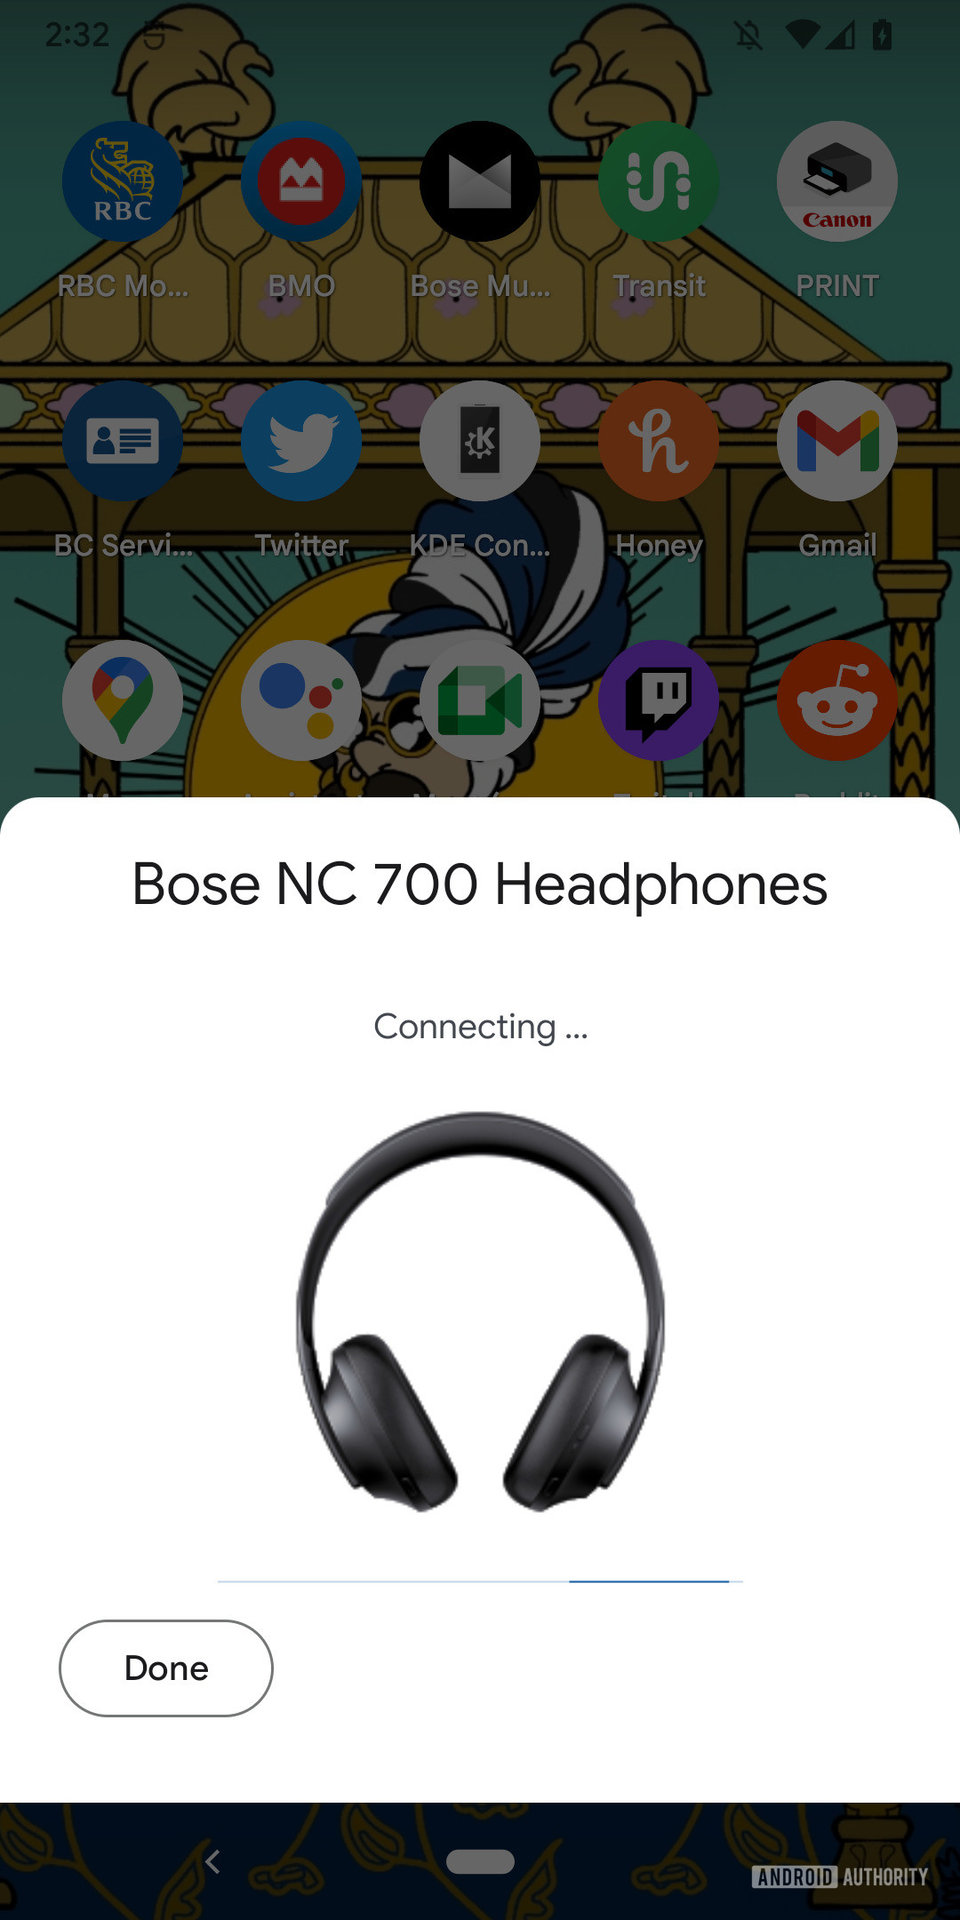 A screenshot of the Google Fast Pair pop up for the Bose Noise Cancelling Headphones 700 with a progress bar showing connection is in progress and a "Done" button visible.